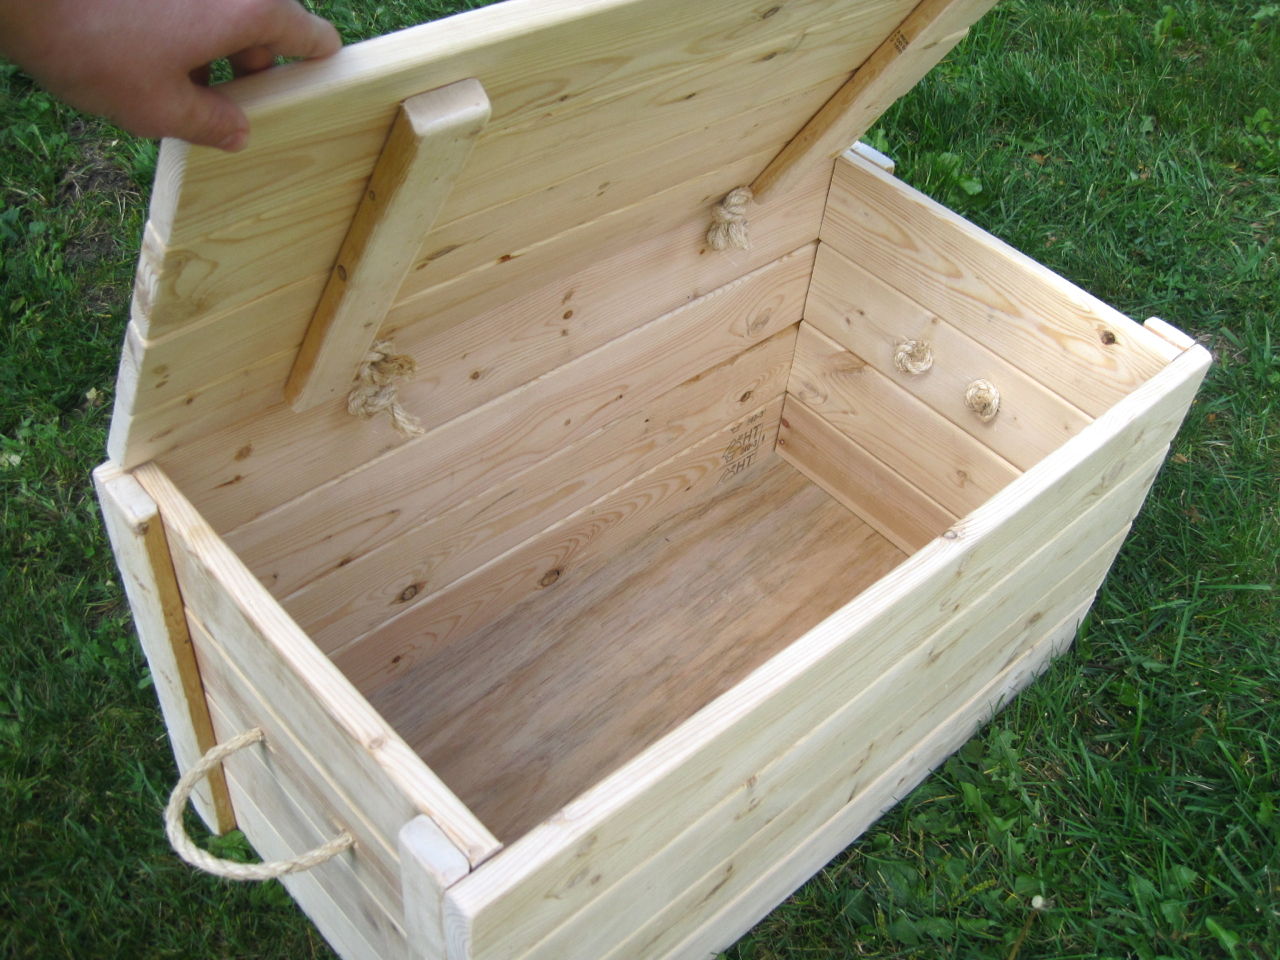 The Project Lady - Wood Storage Chest – Make your own!